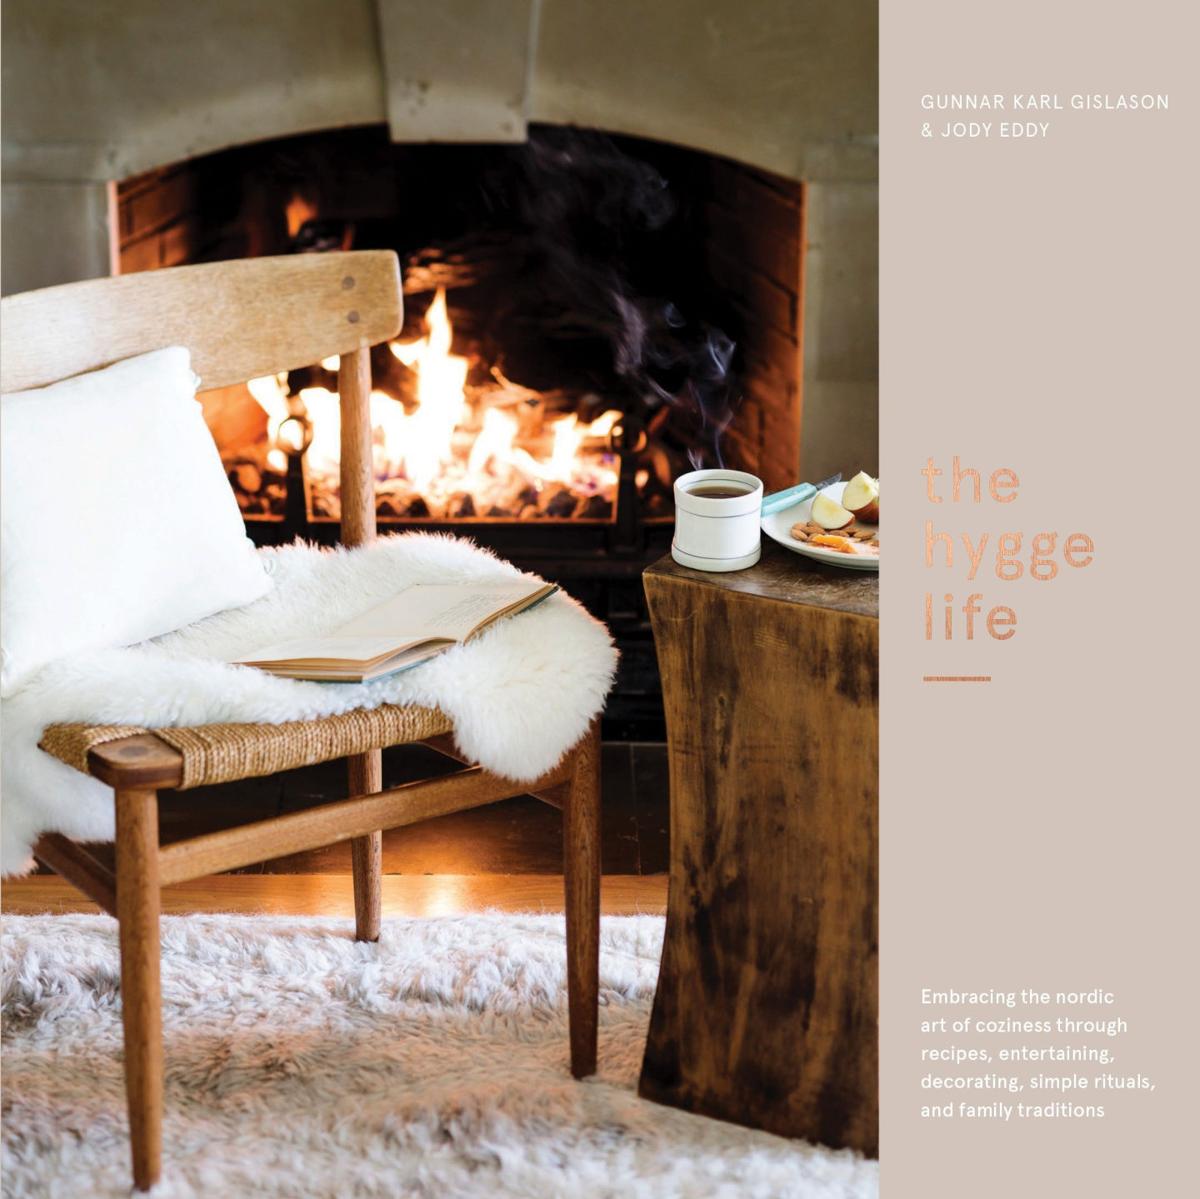 Cool Stuff Get Hygge With The Nordic Art Of Coziness In The